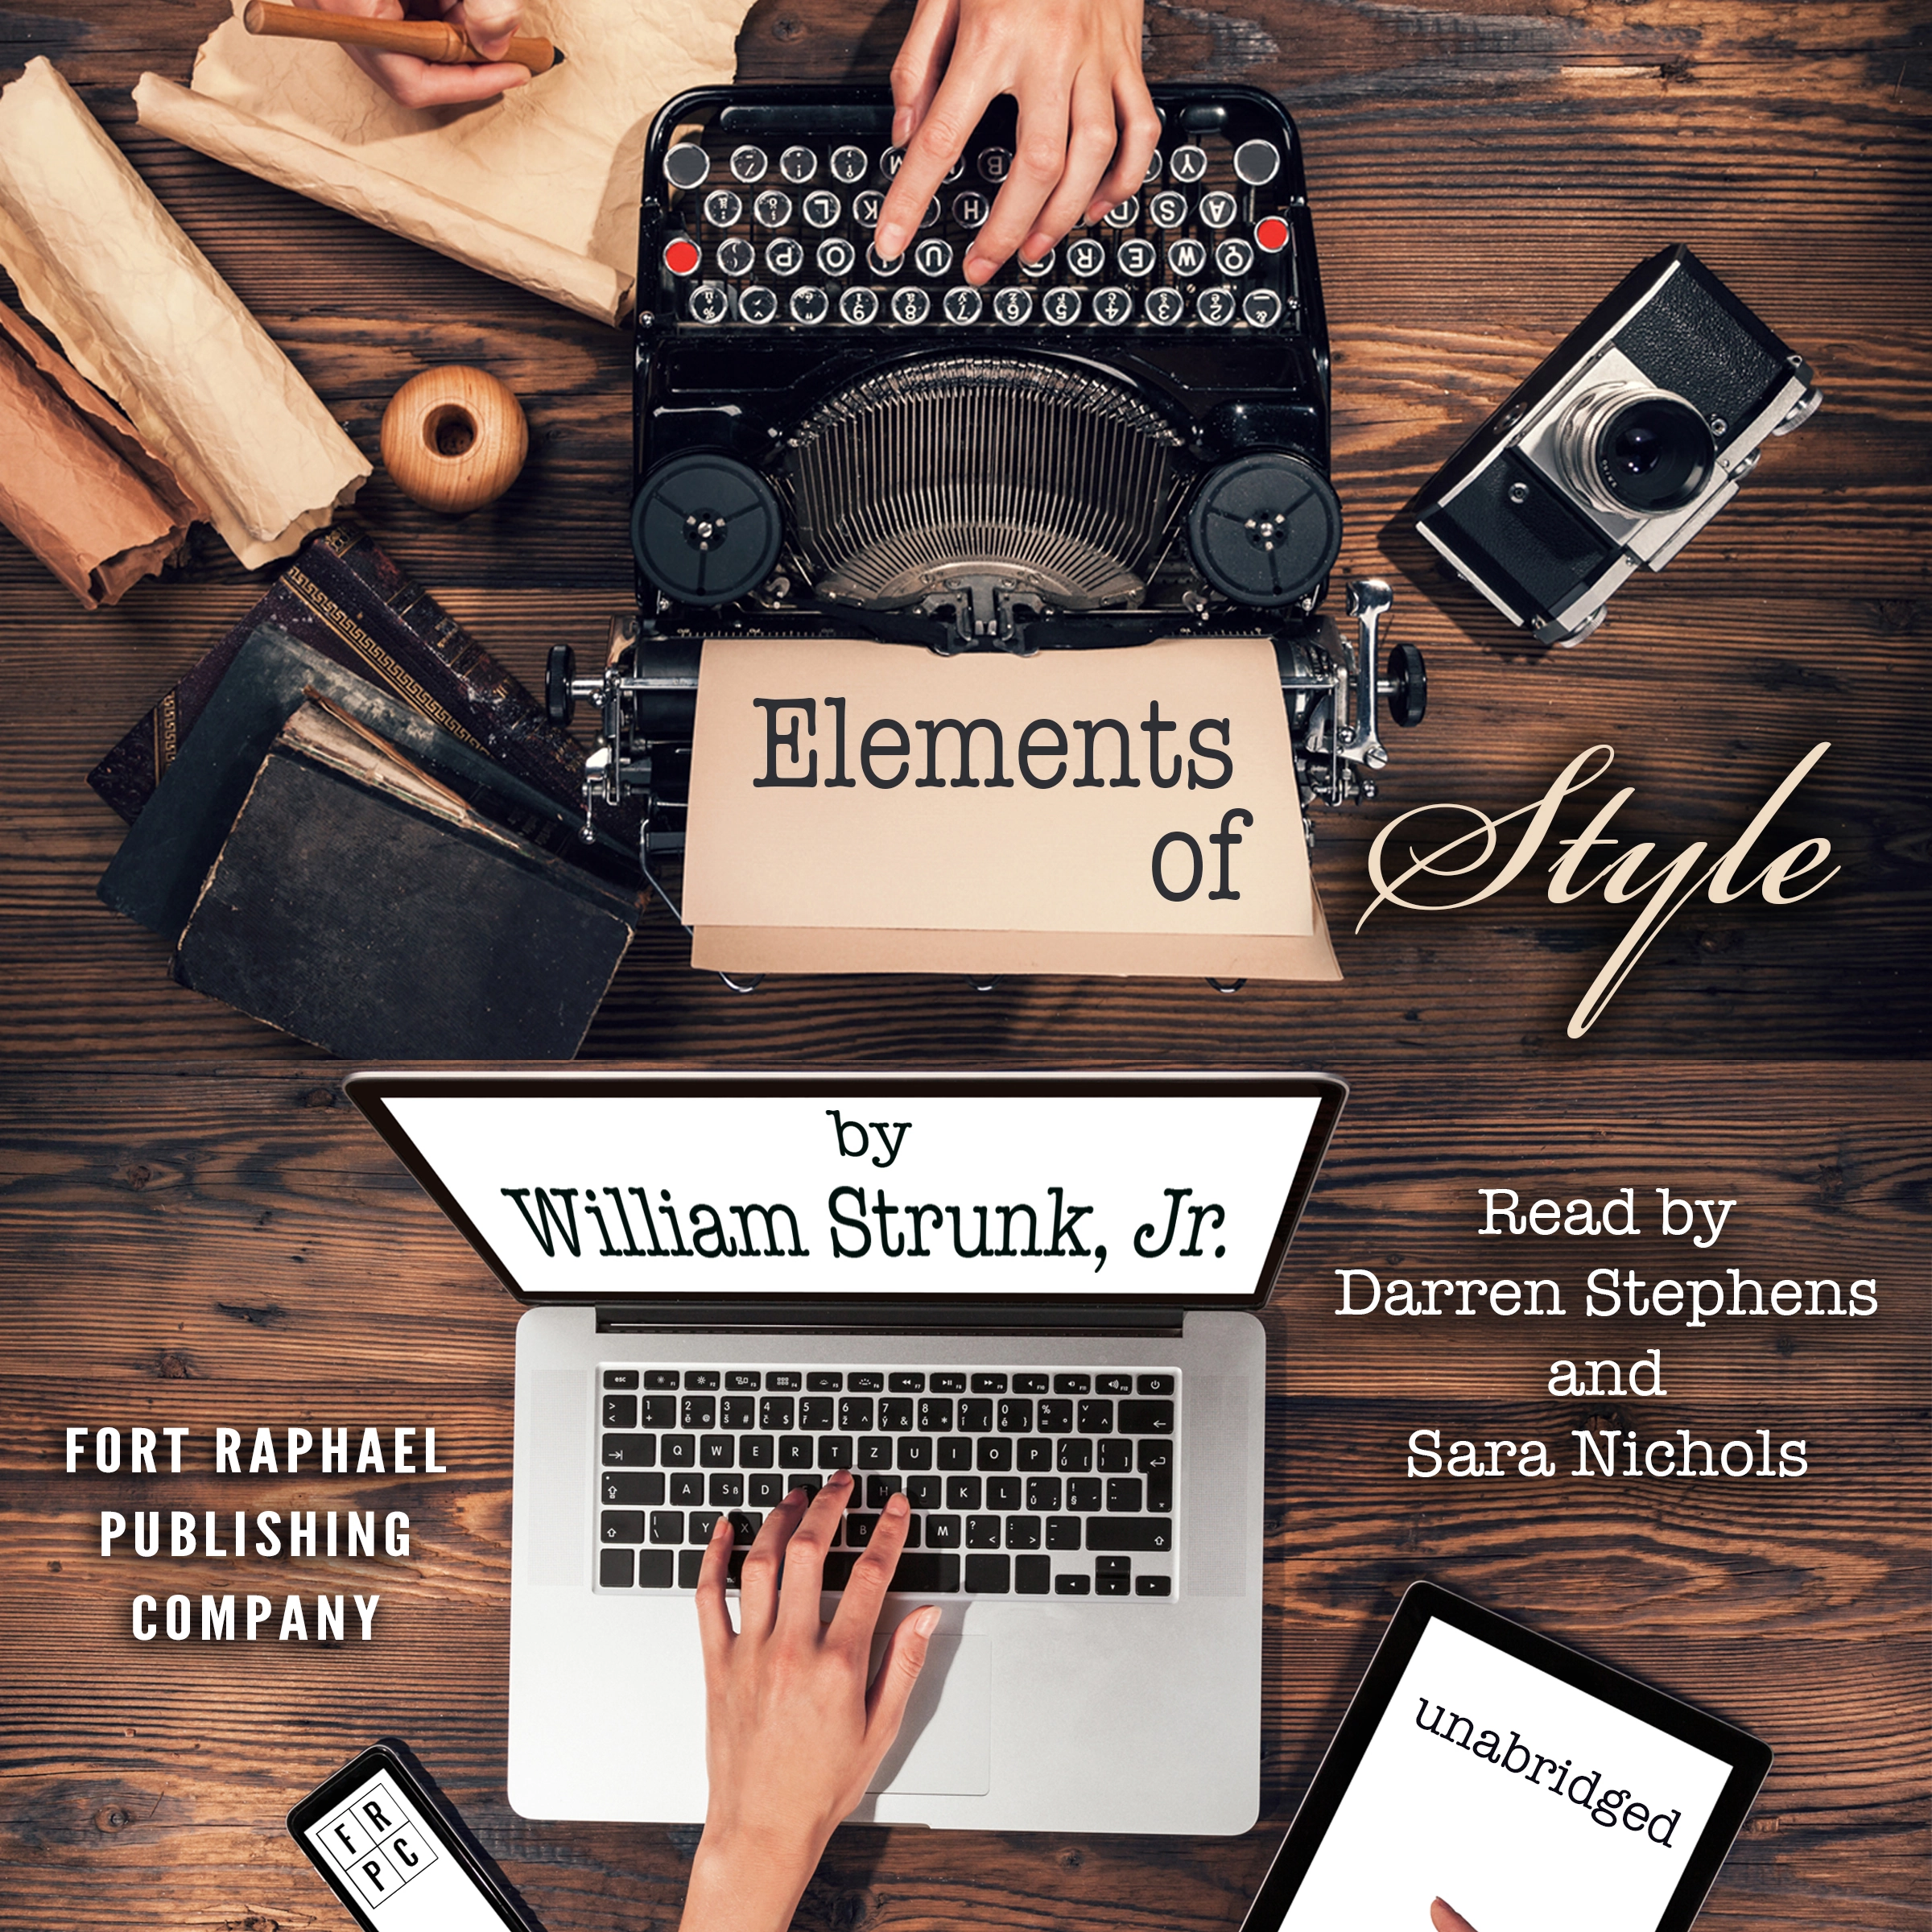 The Elements of Style - Unabridged Audiobook by William Strunk Jr.